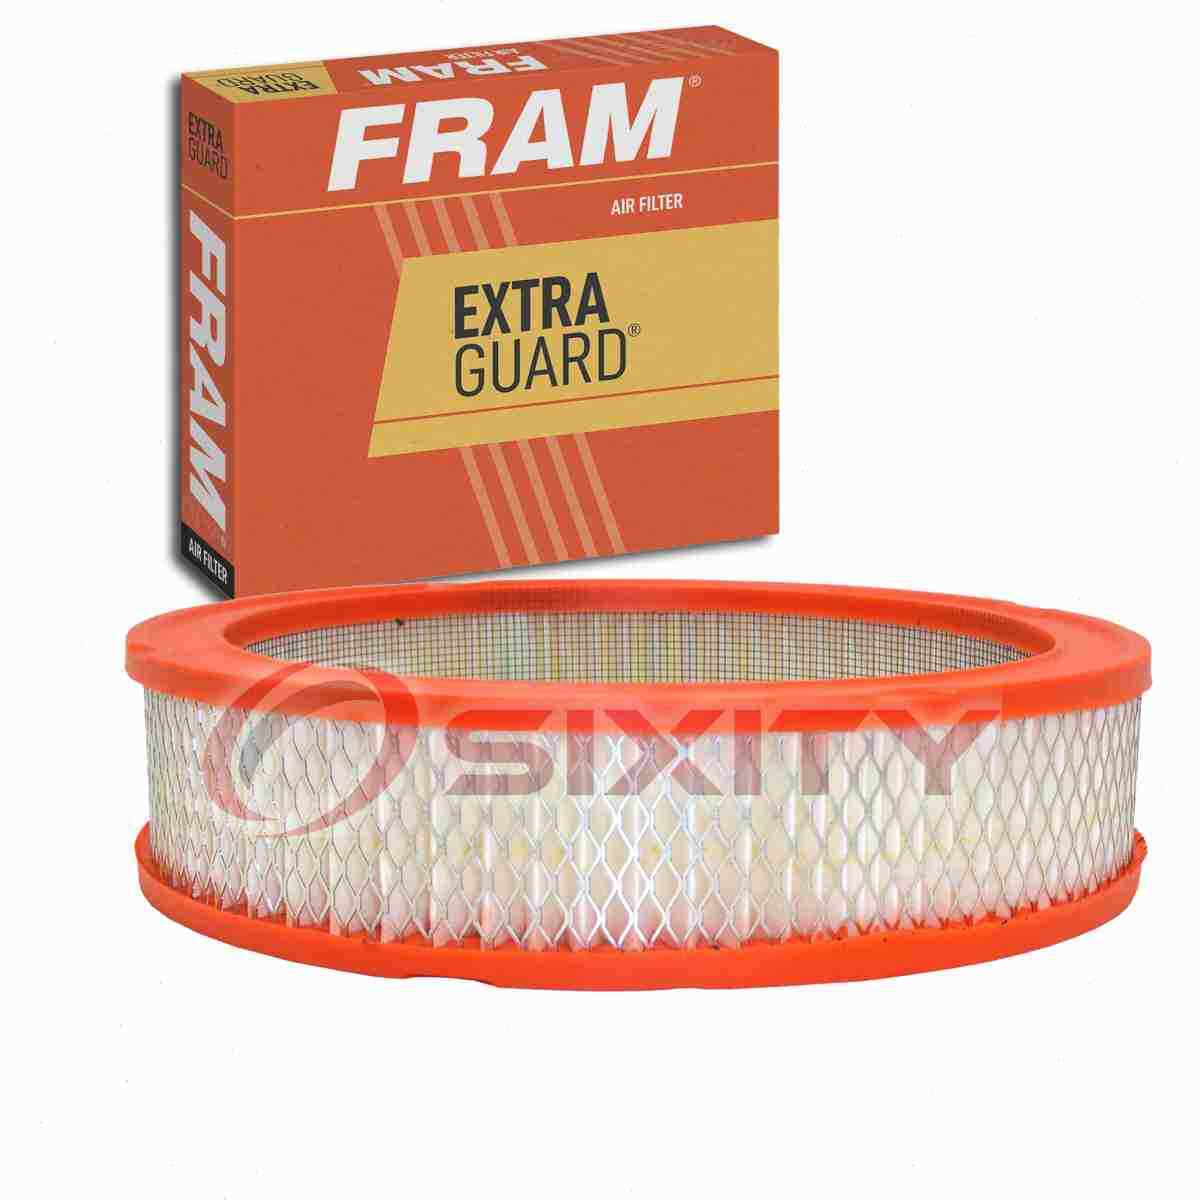 FRAM Extra Guard Air Filter for 1975-1980 American Motors Pacer Intake Inlet ed